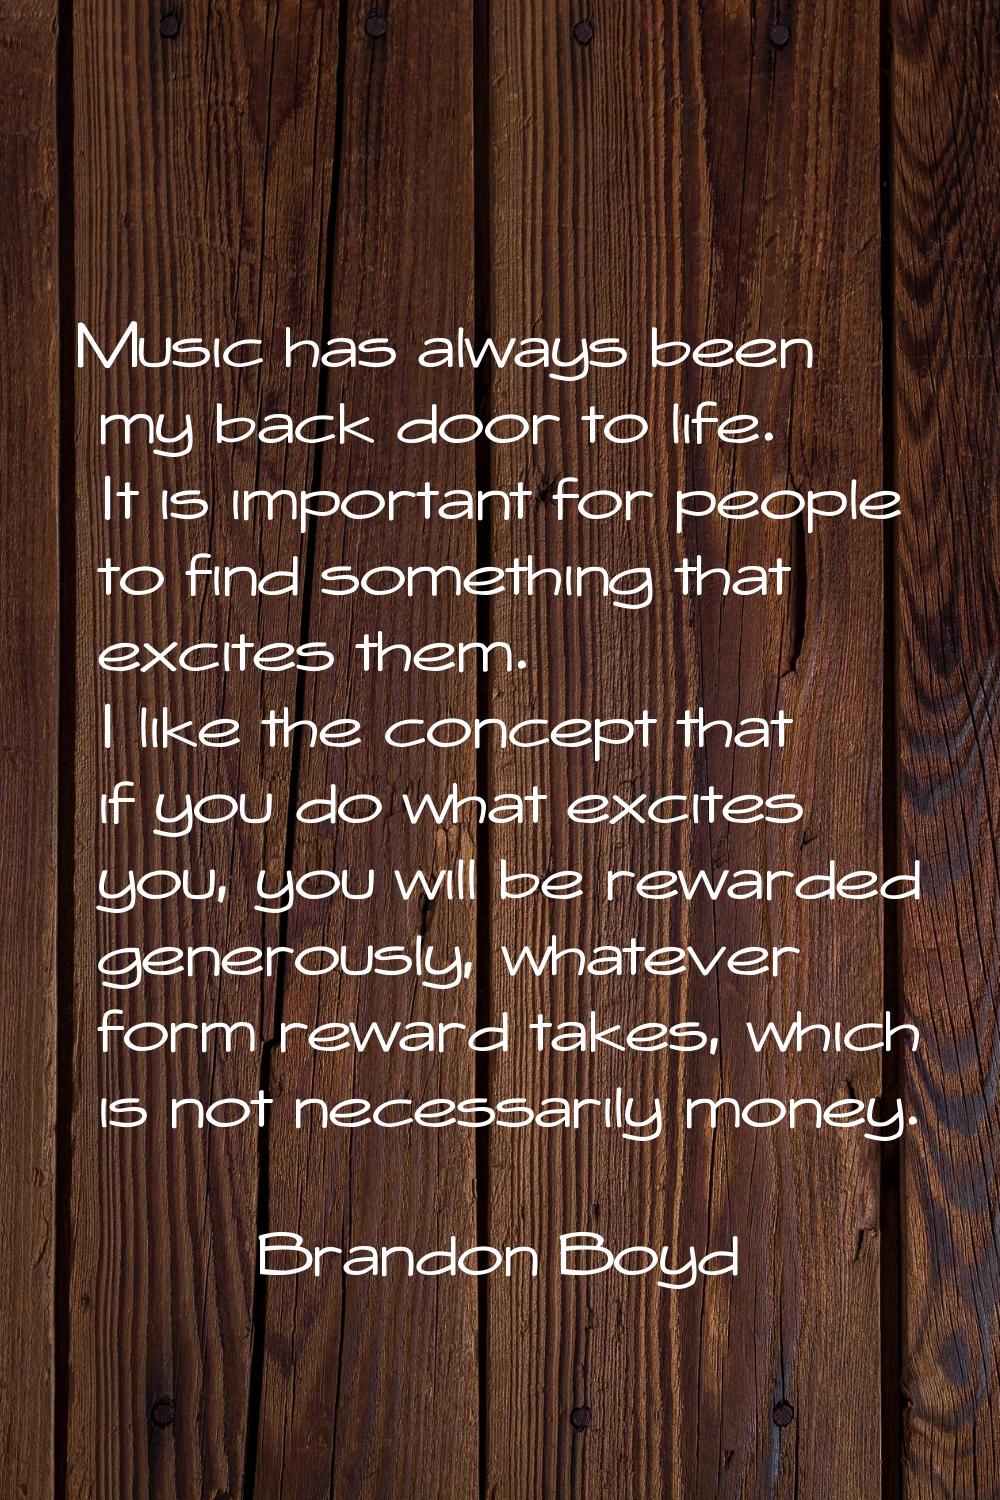 Music has always been my back door to life. It is important for people to find something that excit